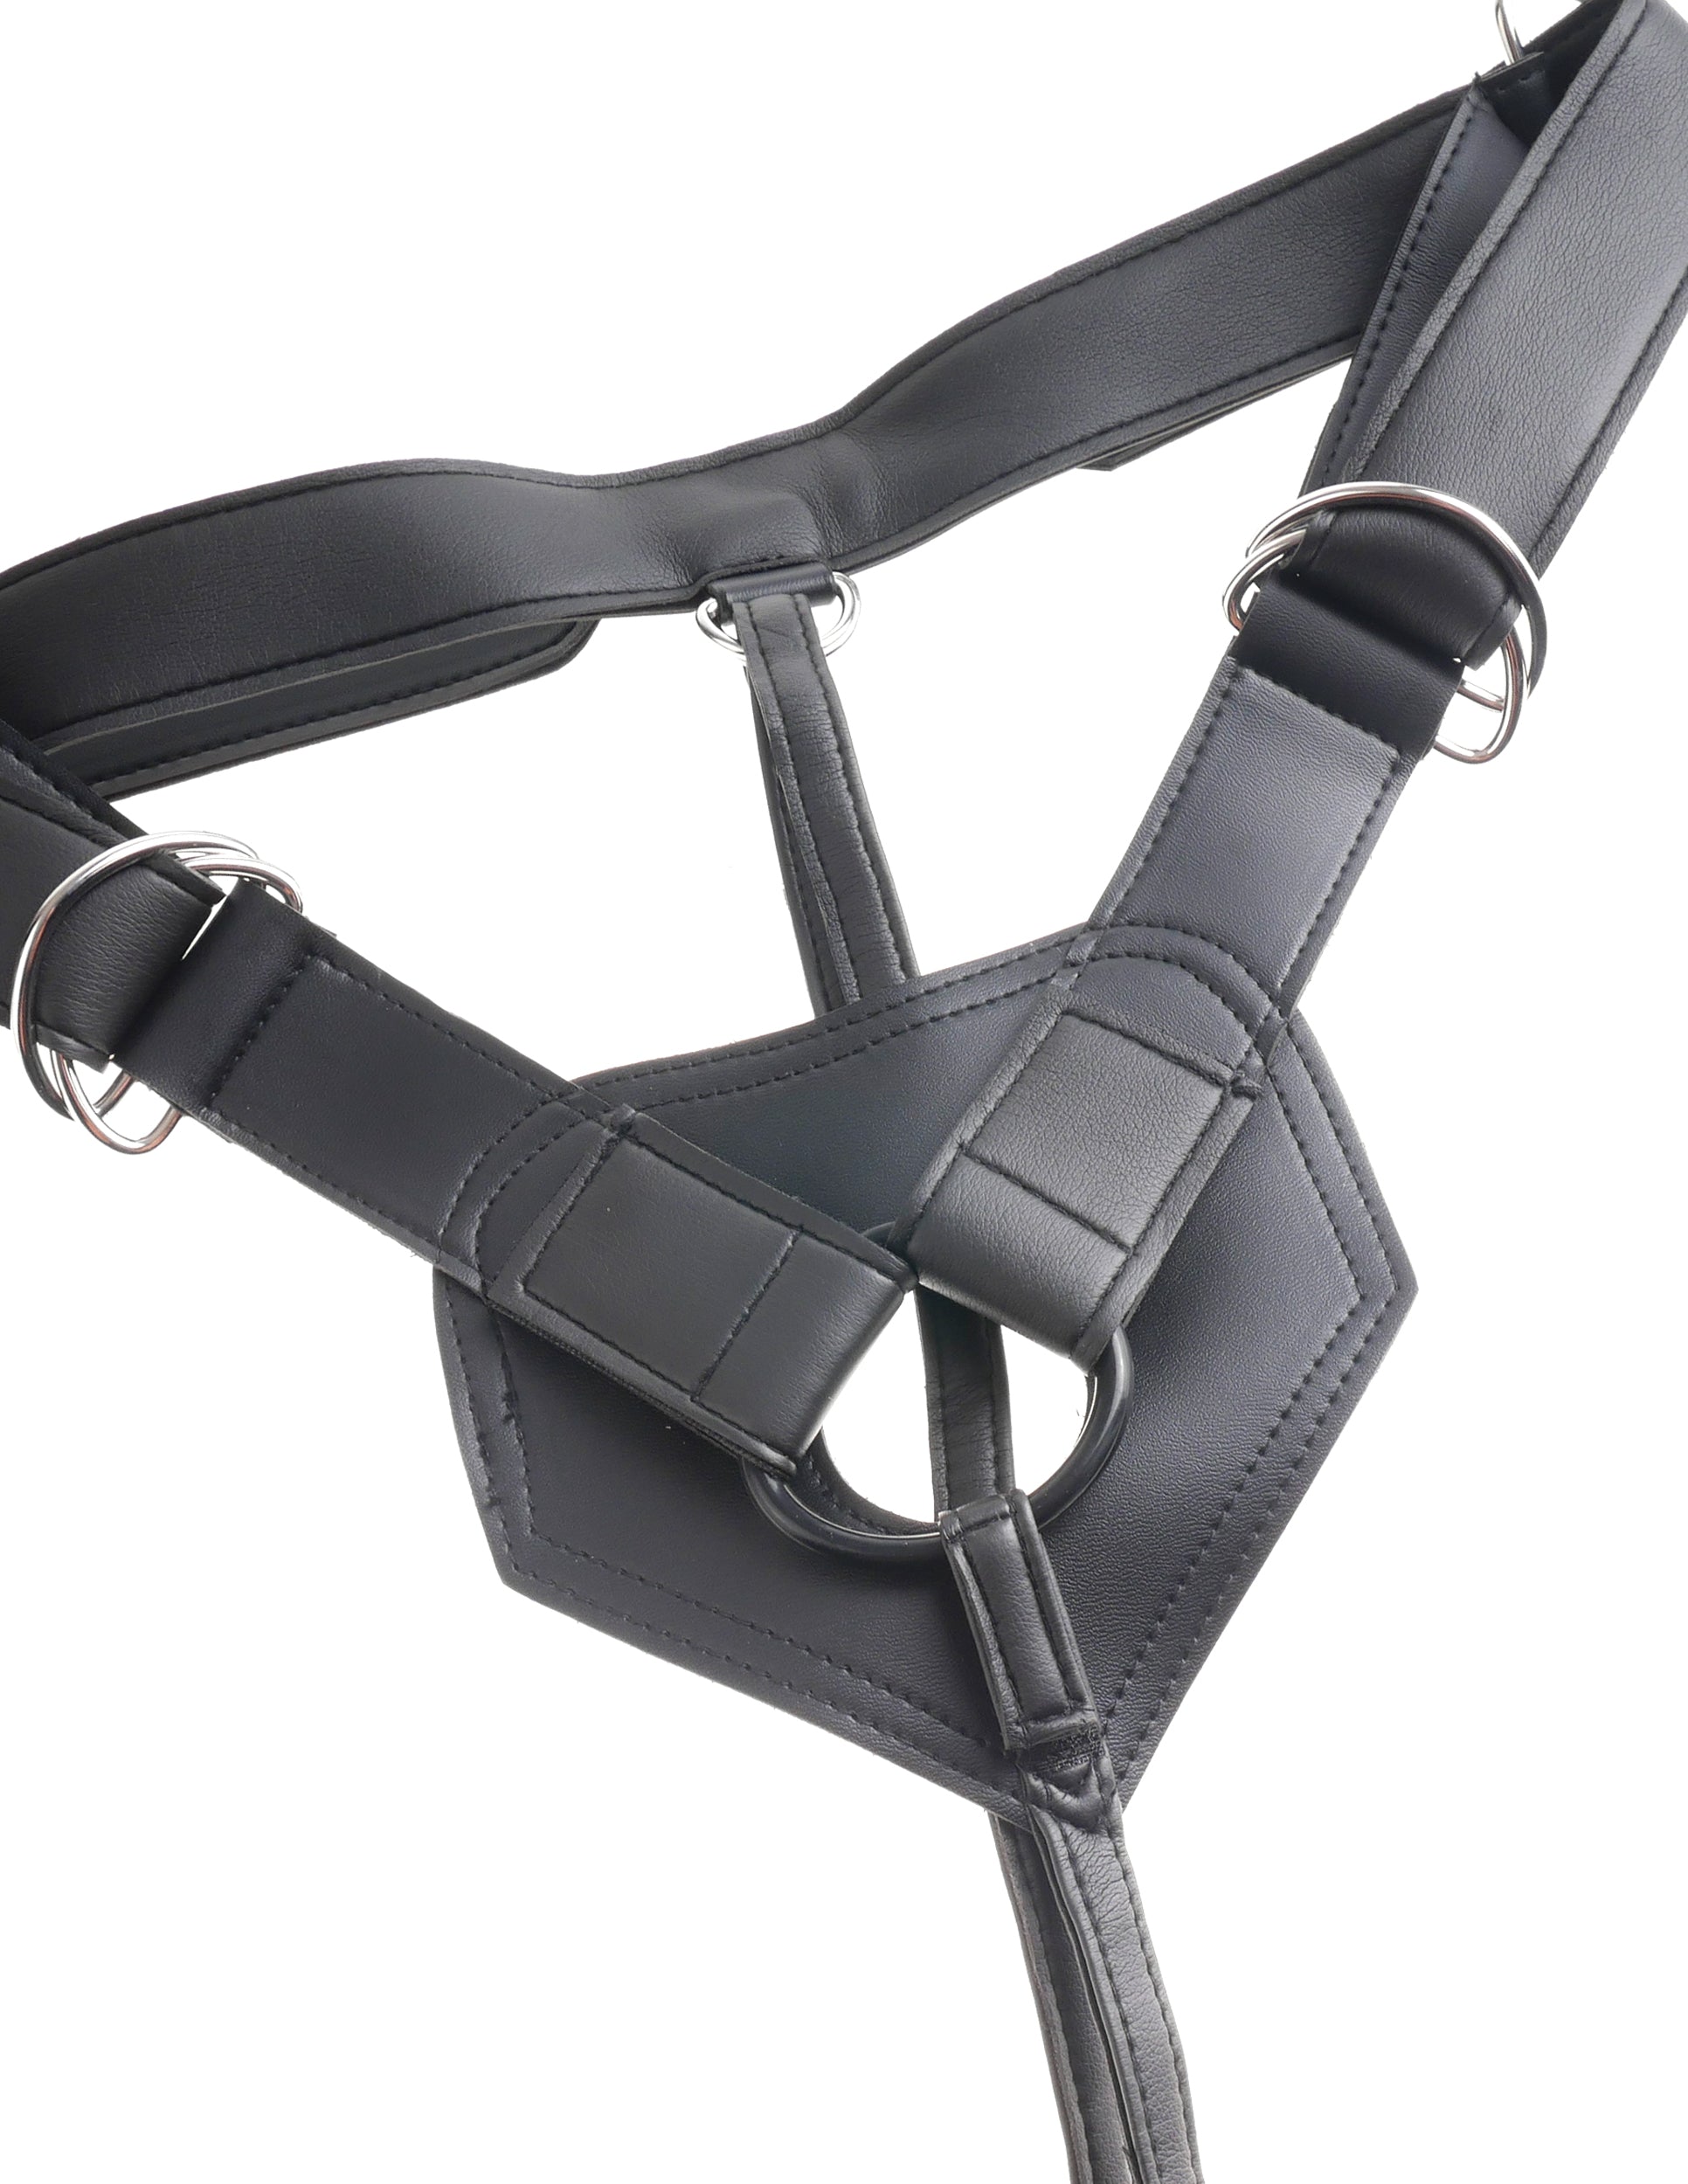 King Cock Strap on Harness With 6 Inch Cock - Tan